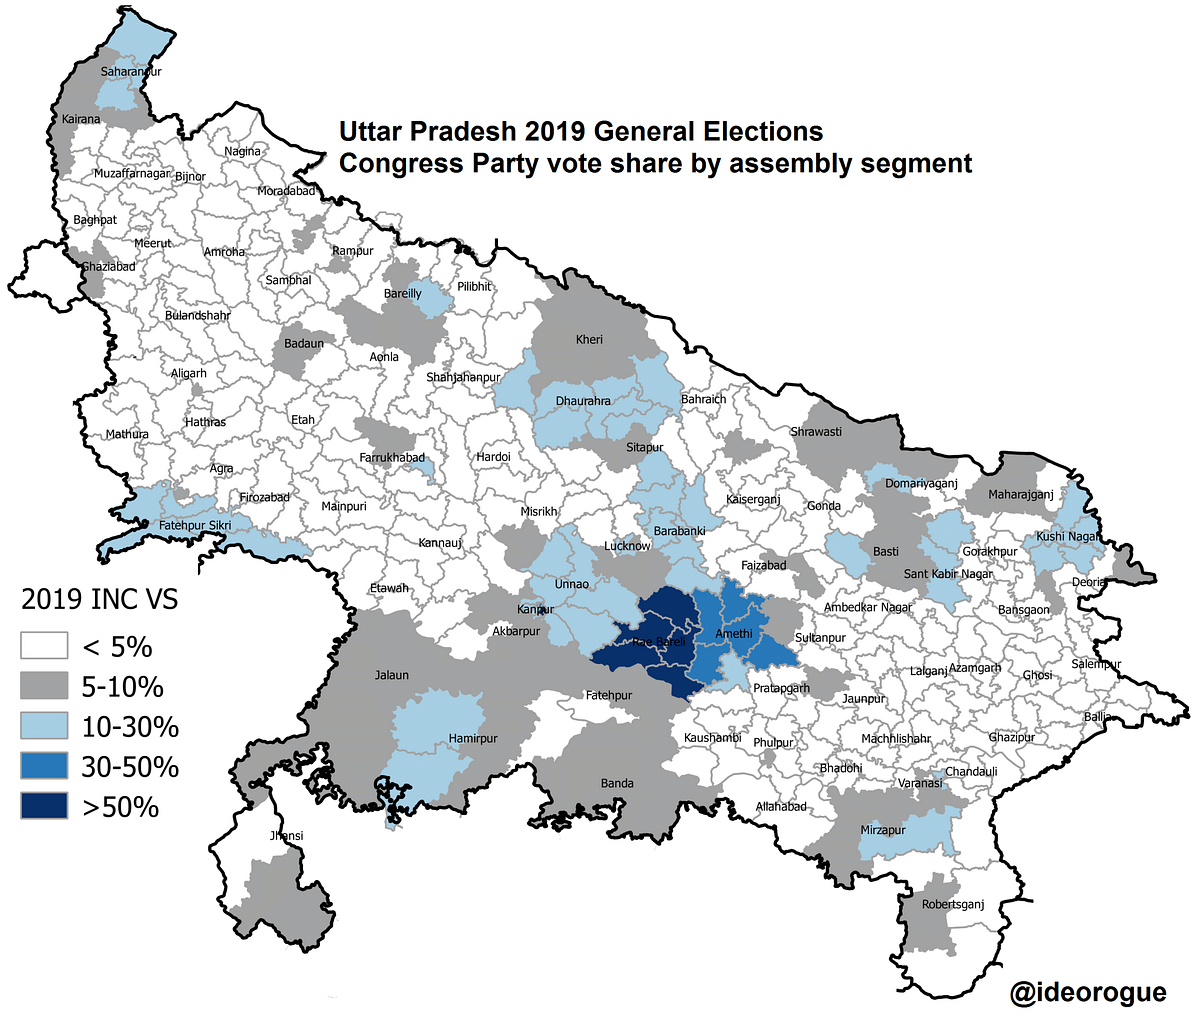 Map 4: Congress vote share in UP general elections 2019 by assembly segment